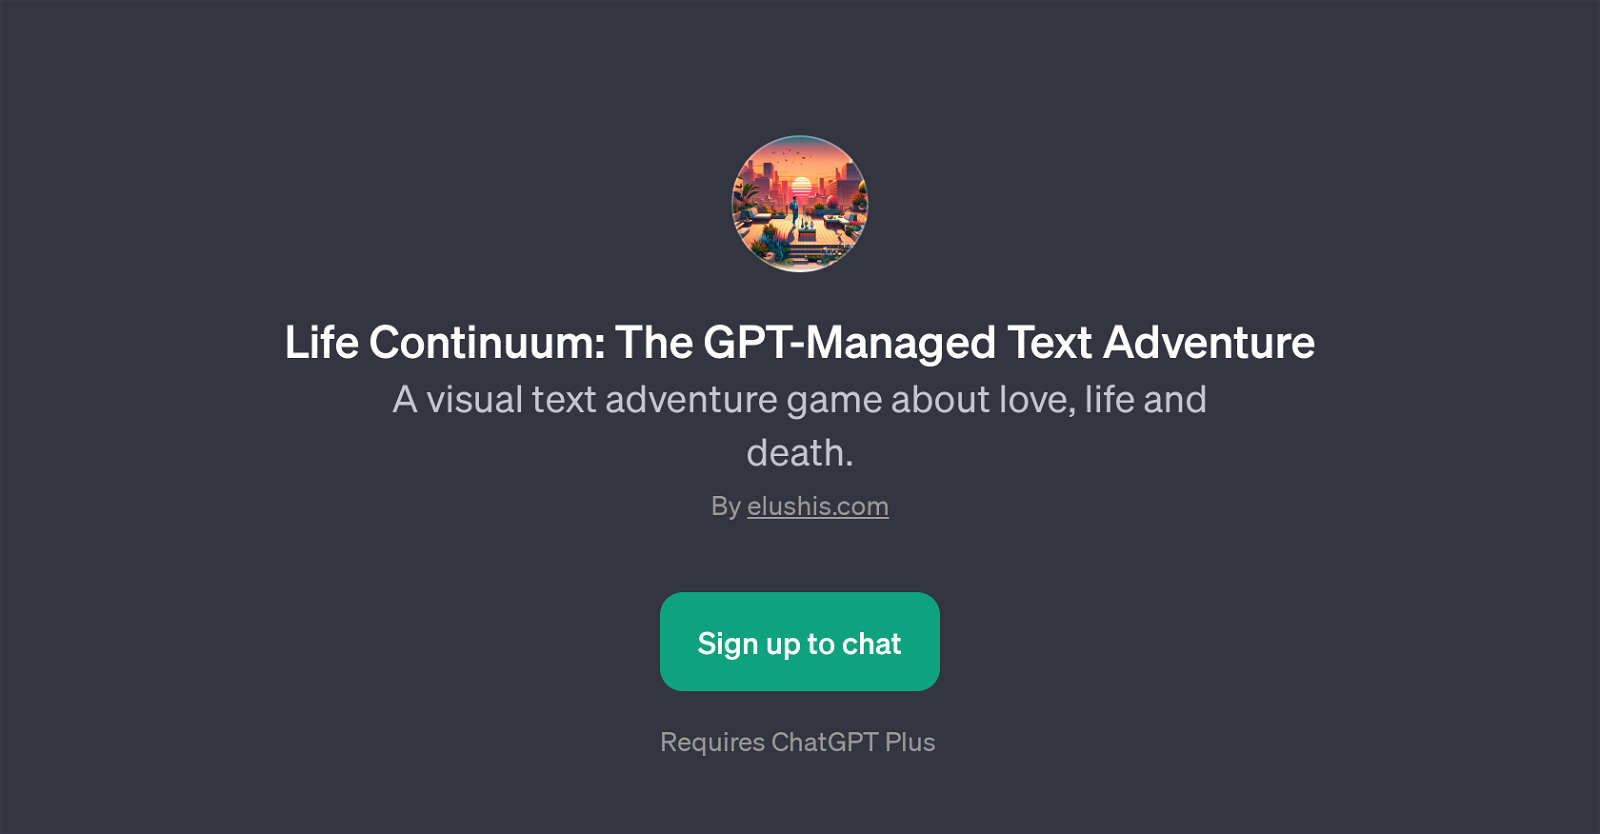 Life Continuum: The GPT-Managed Text Adventure website